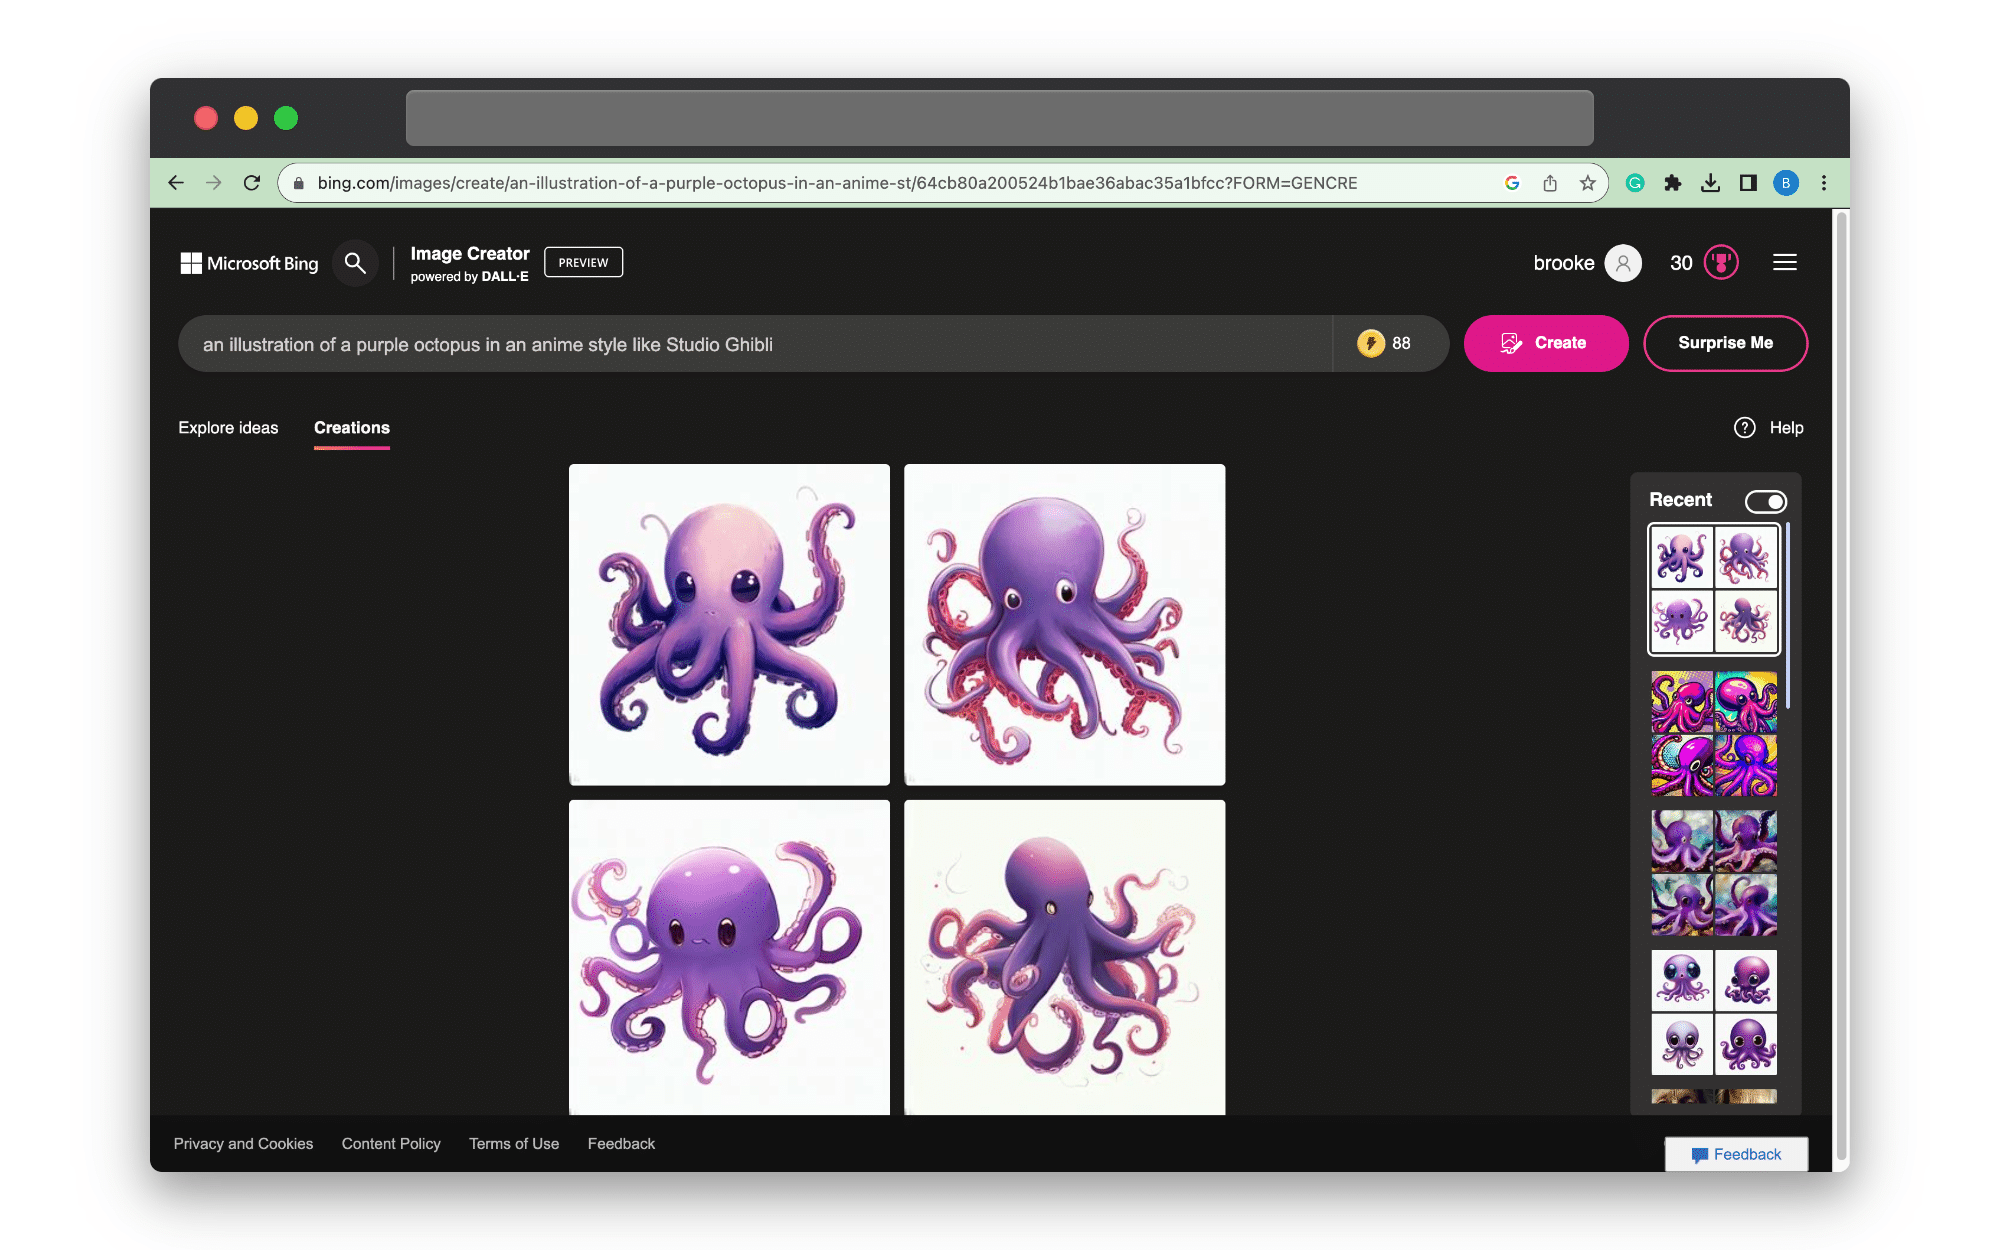 example: “an illustration of a purple octopus in an anime style like Studio Ghibli